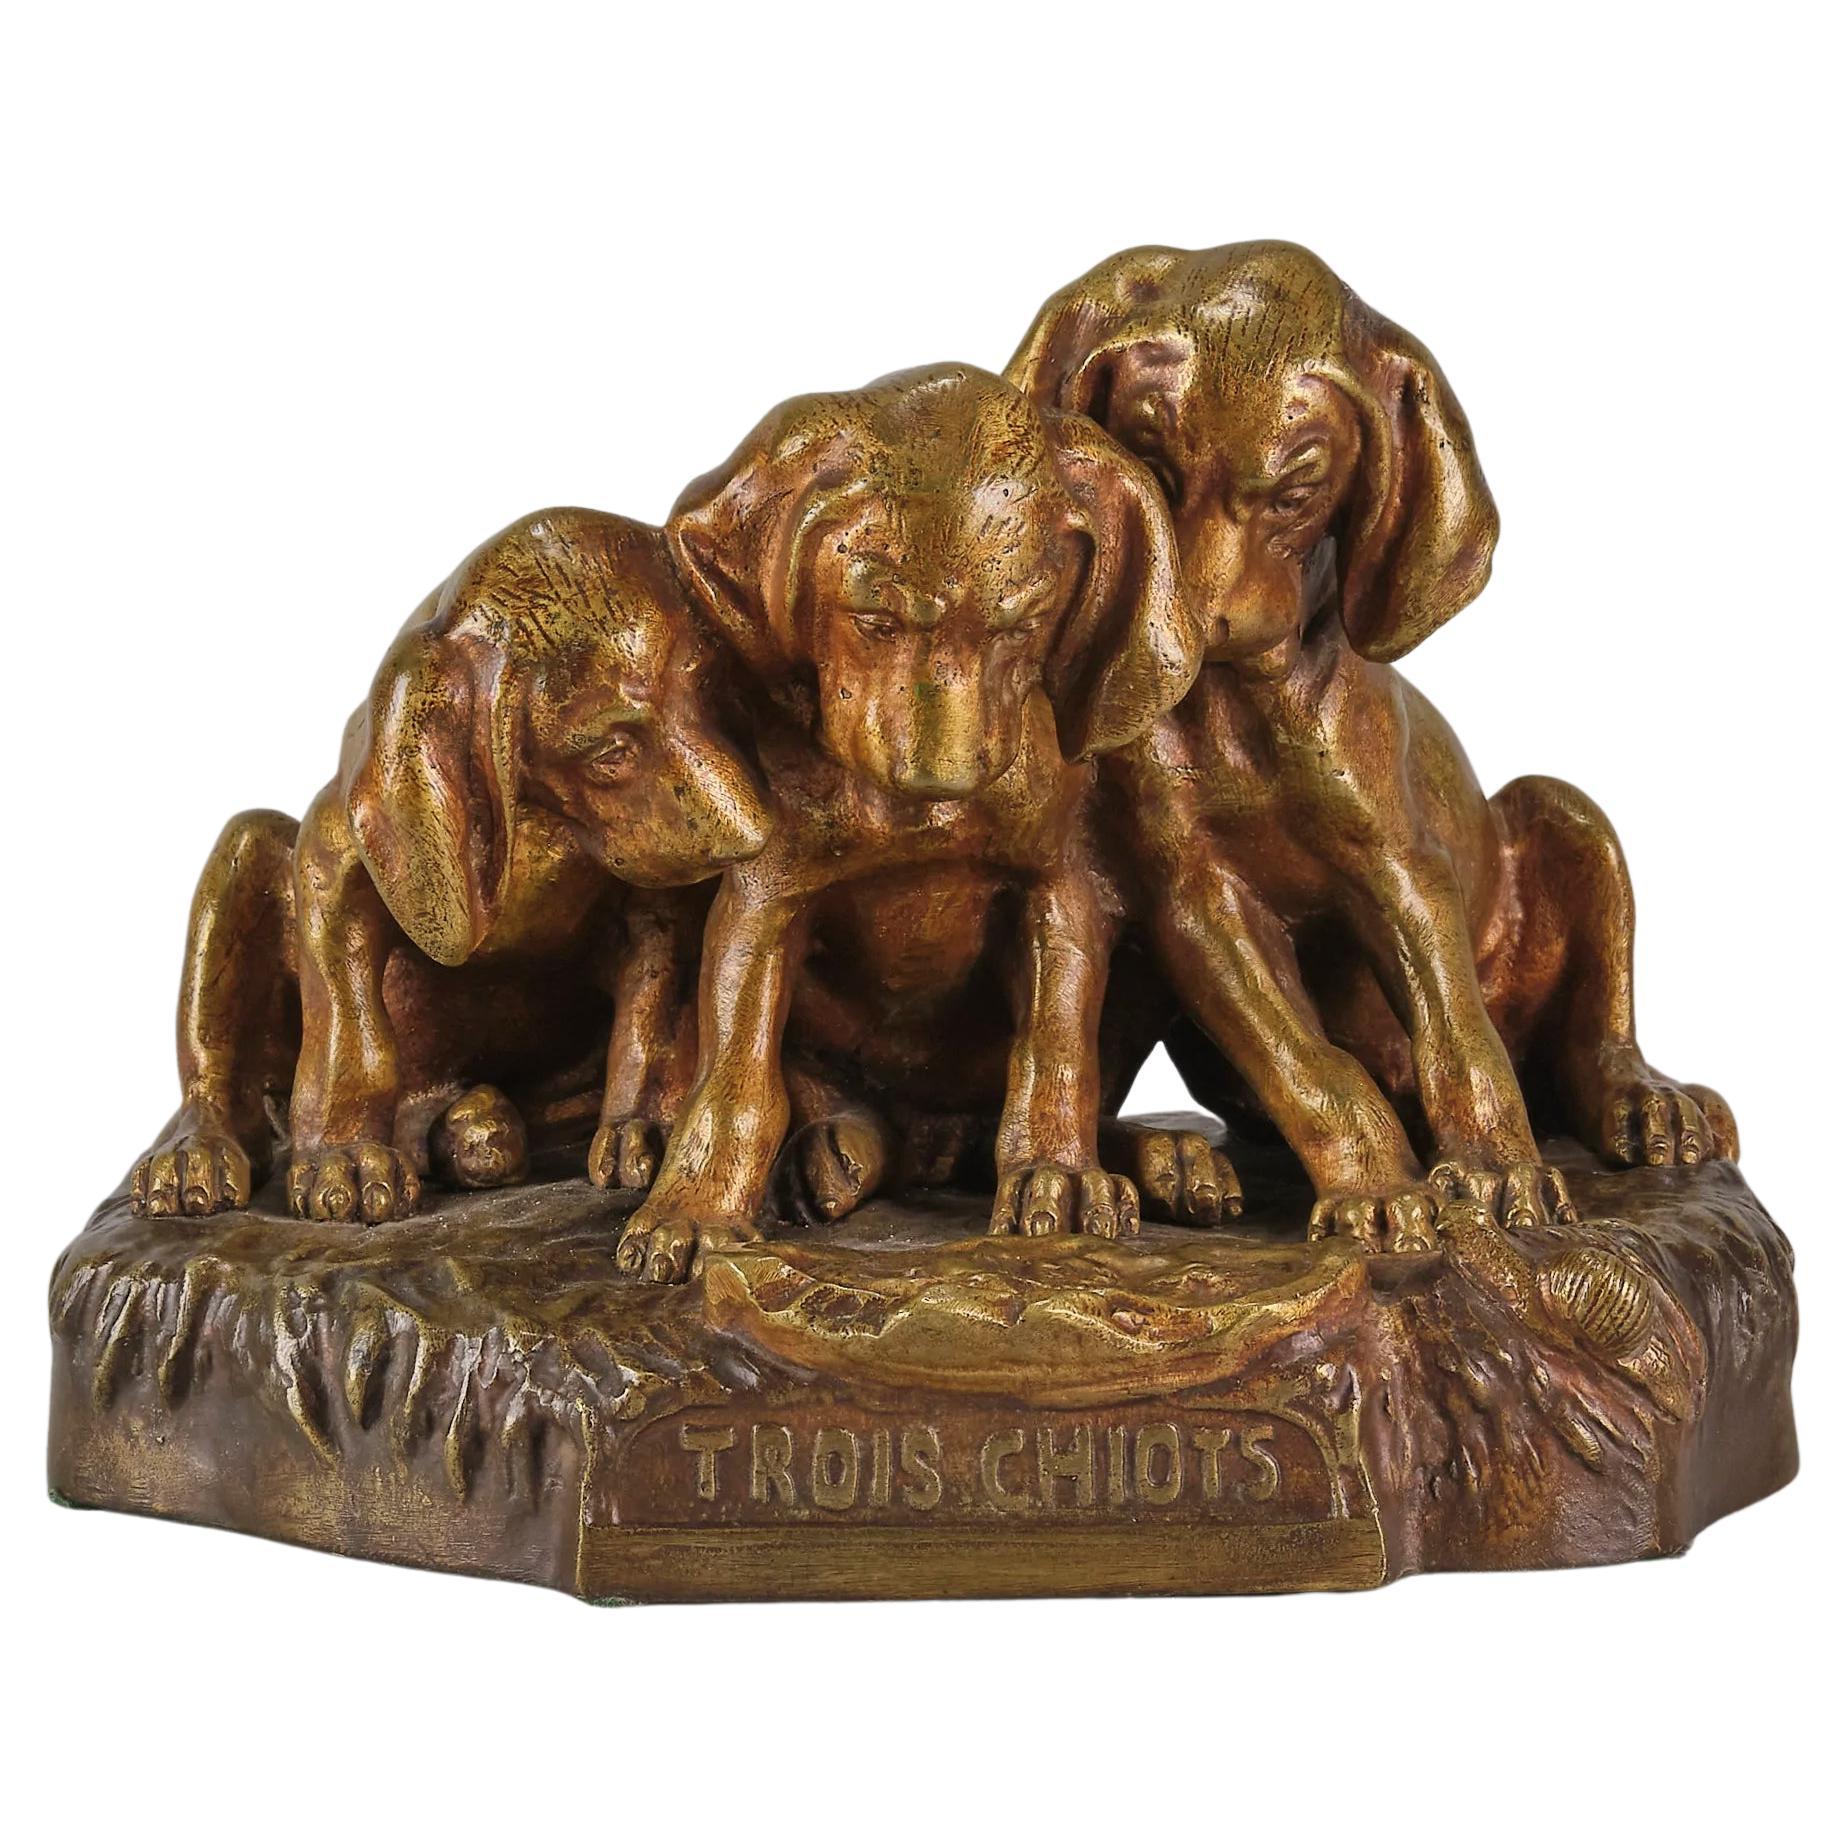 Animalier Bronze Sculpture Entitled "Trois Chiots" by Georges Vacossin